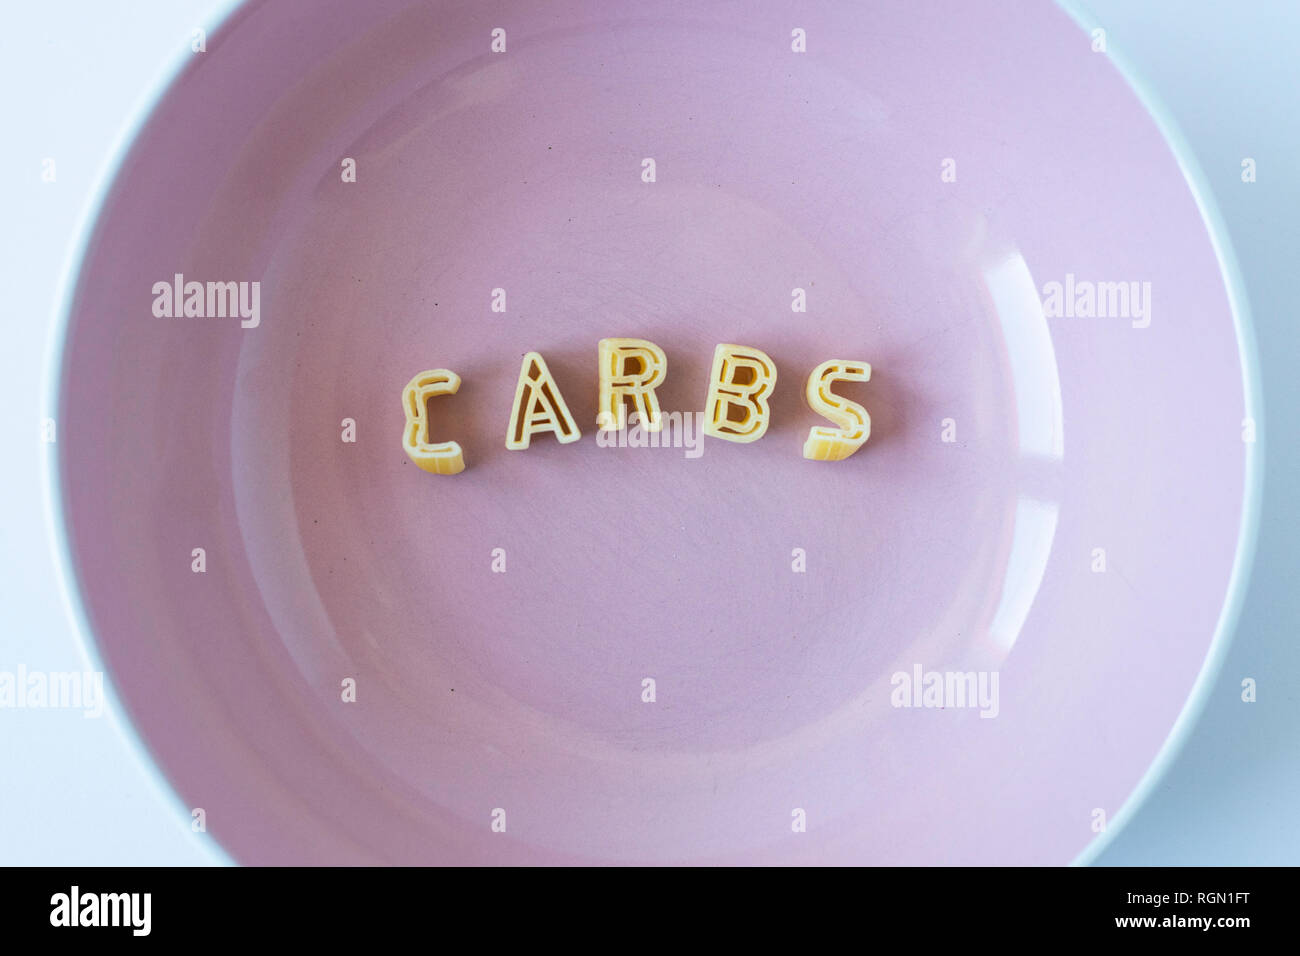 The word 'carbs' composed with real pasta letters in a pink dish. Stock Photo